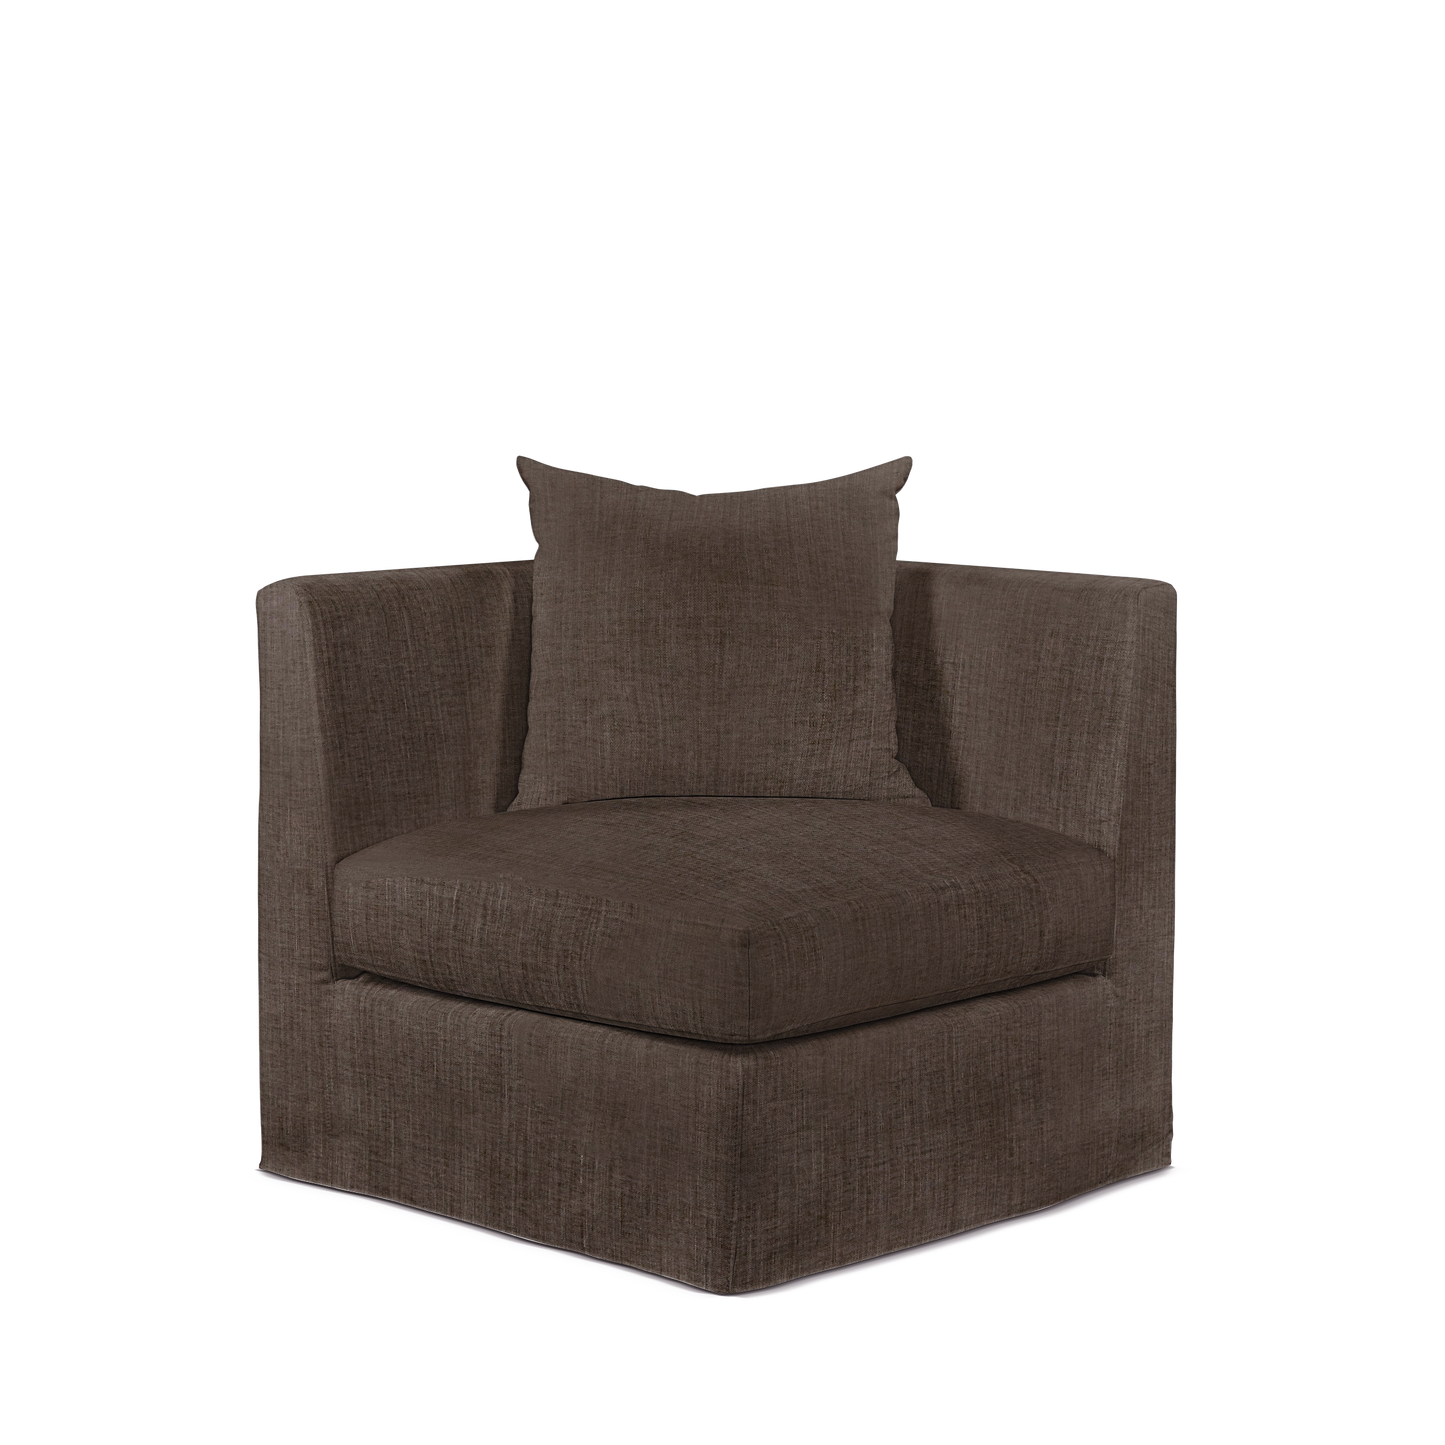 Front view of Breathe armchair with warm grey textile